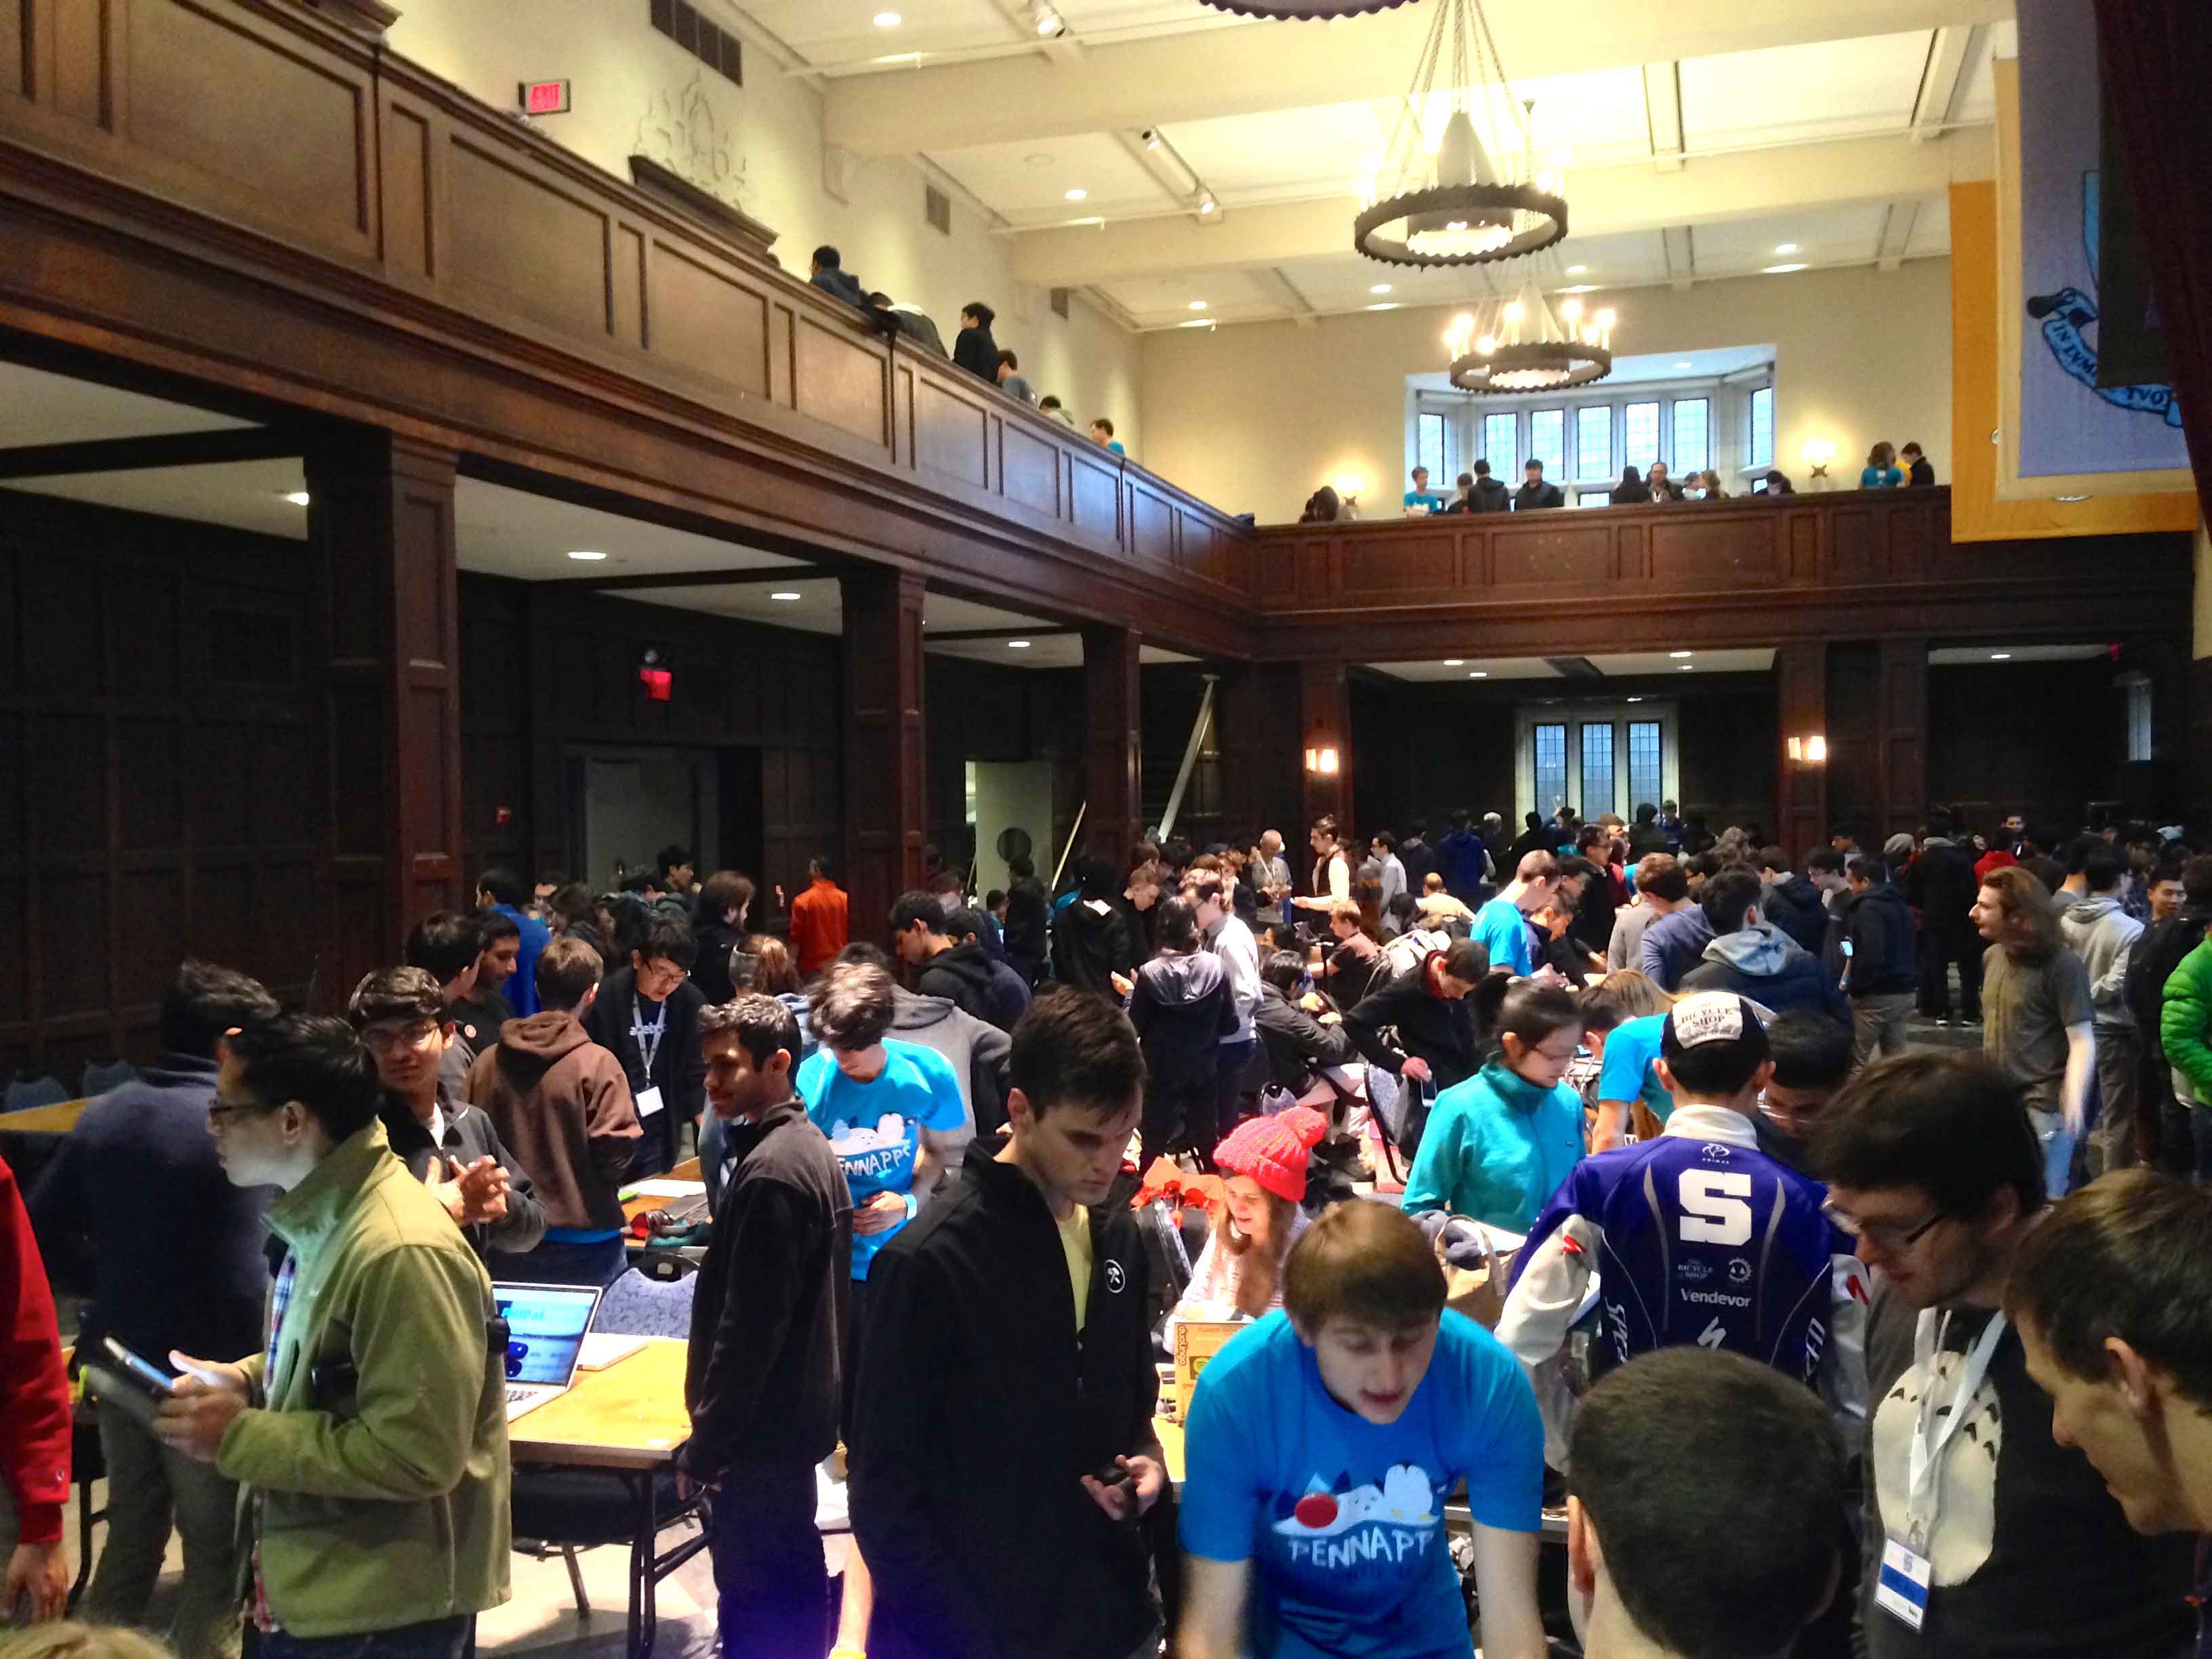 PennApps 2015